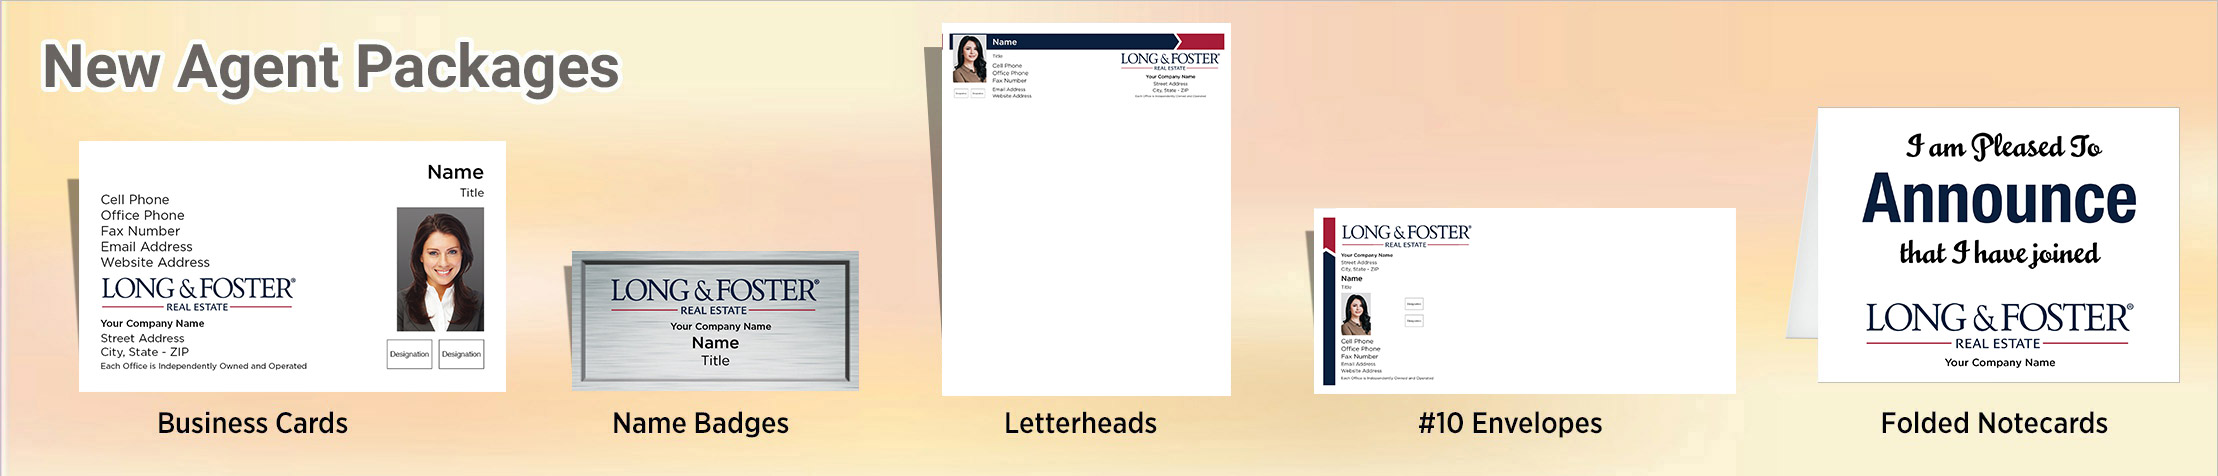 Long and Foster Real Estate Gold, Silver and Bronze Agent Packages - Long and Foster approved vendor personalized business cards, letterhead, envelopes and note cards | BestPrintBuy.com